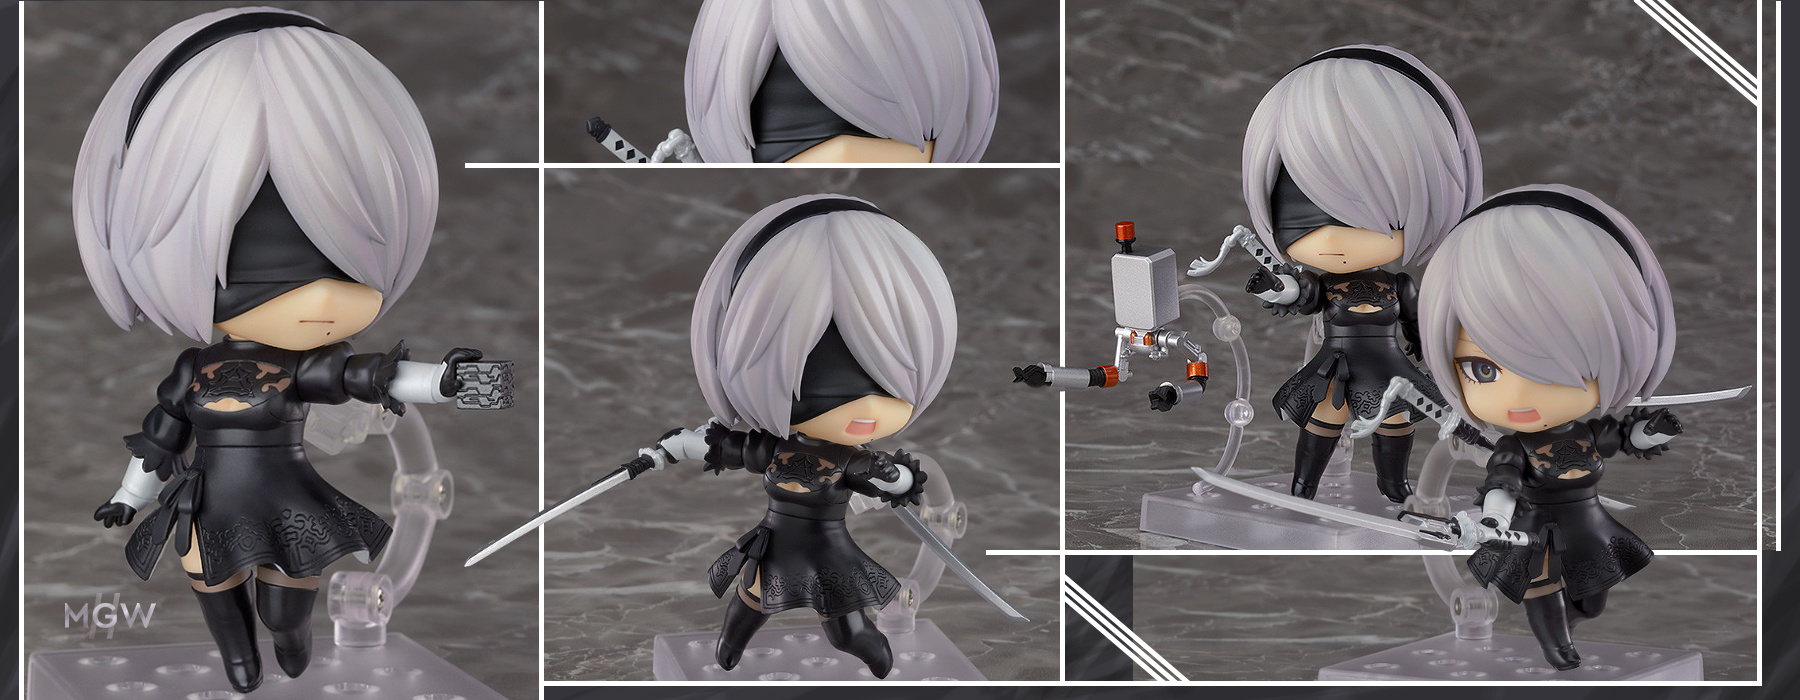 Nendoroid YoRHa No.2 Type B 2B by SQUARE ENIX from NieR Automata MGW Anime Figure Pre Order Guide 2